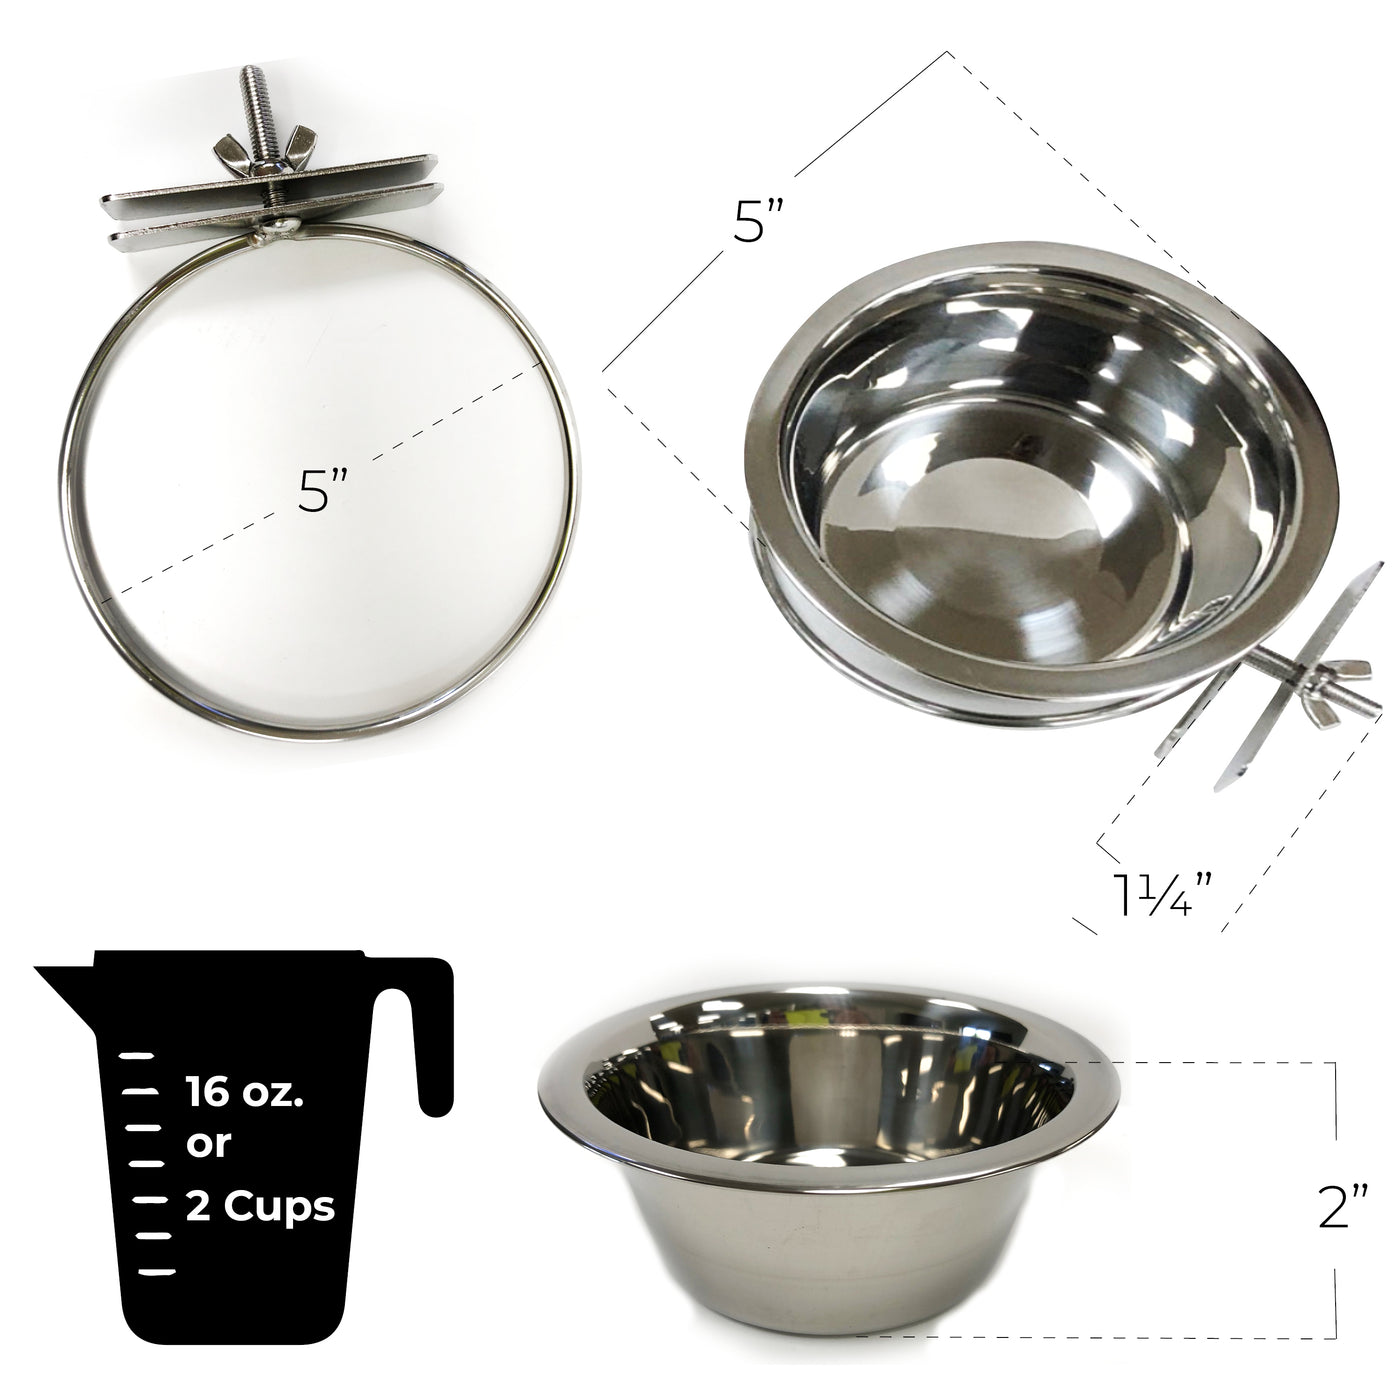 Cork and Stainless Steel Dog Bowl - CorkHouse